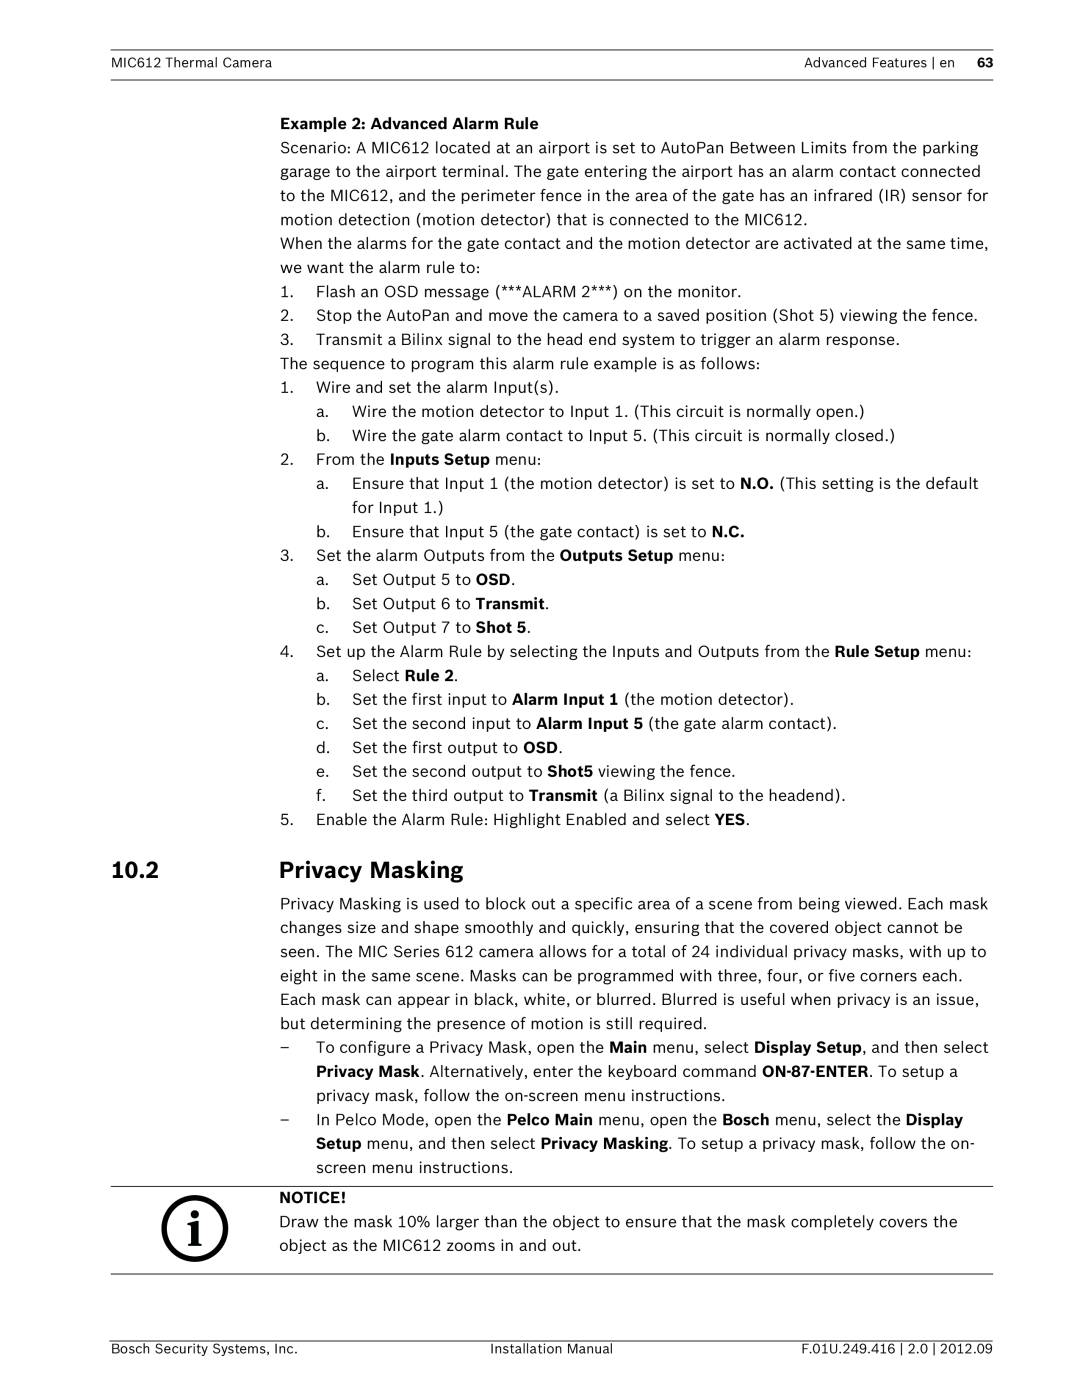 Bosch Appliances MIC612 installation manual 10.2, Privacy Masking, Example 2 Advanced Alarm Rule 